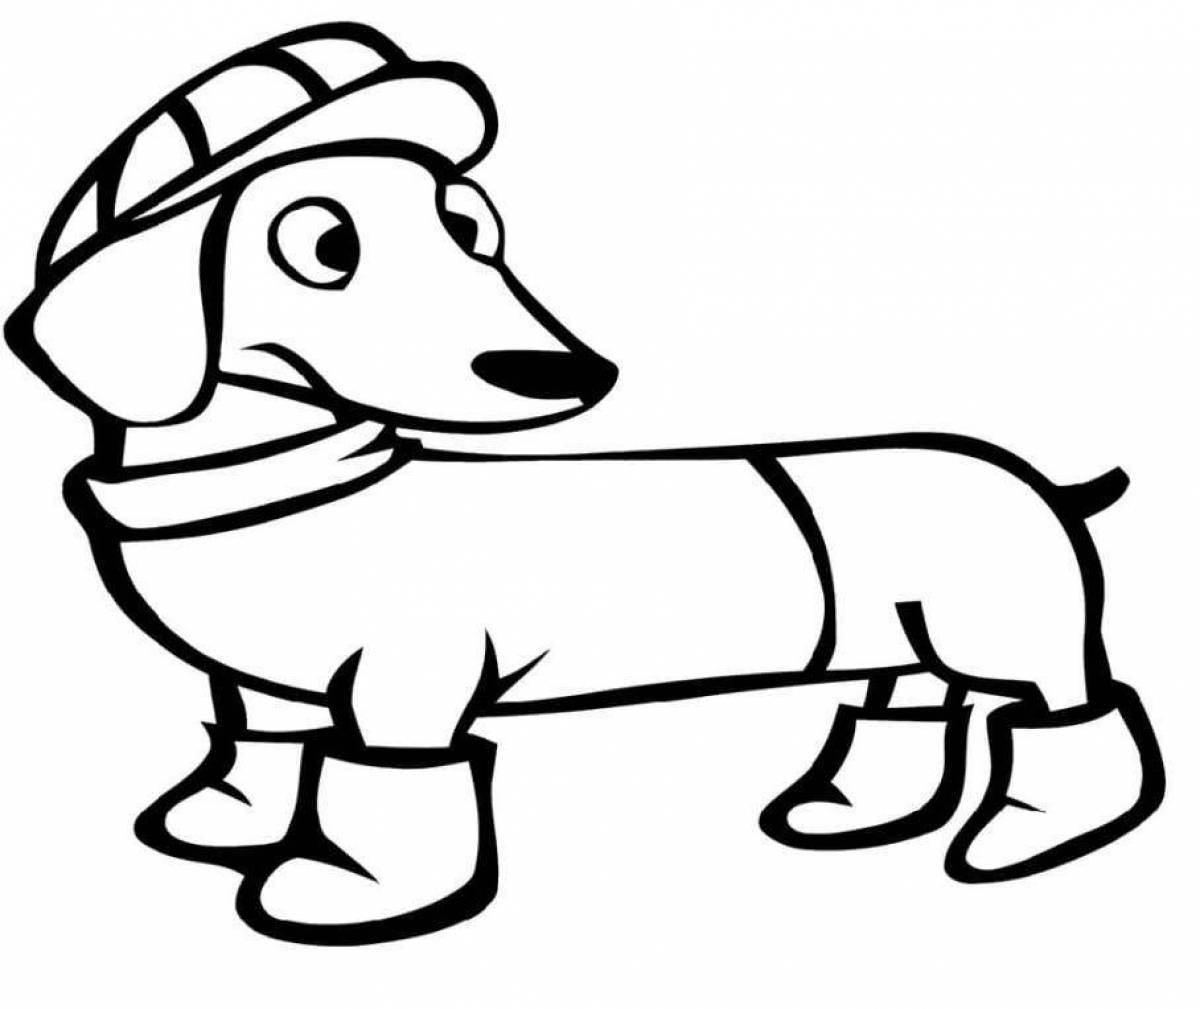 Live dachshund coloring